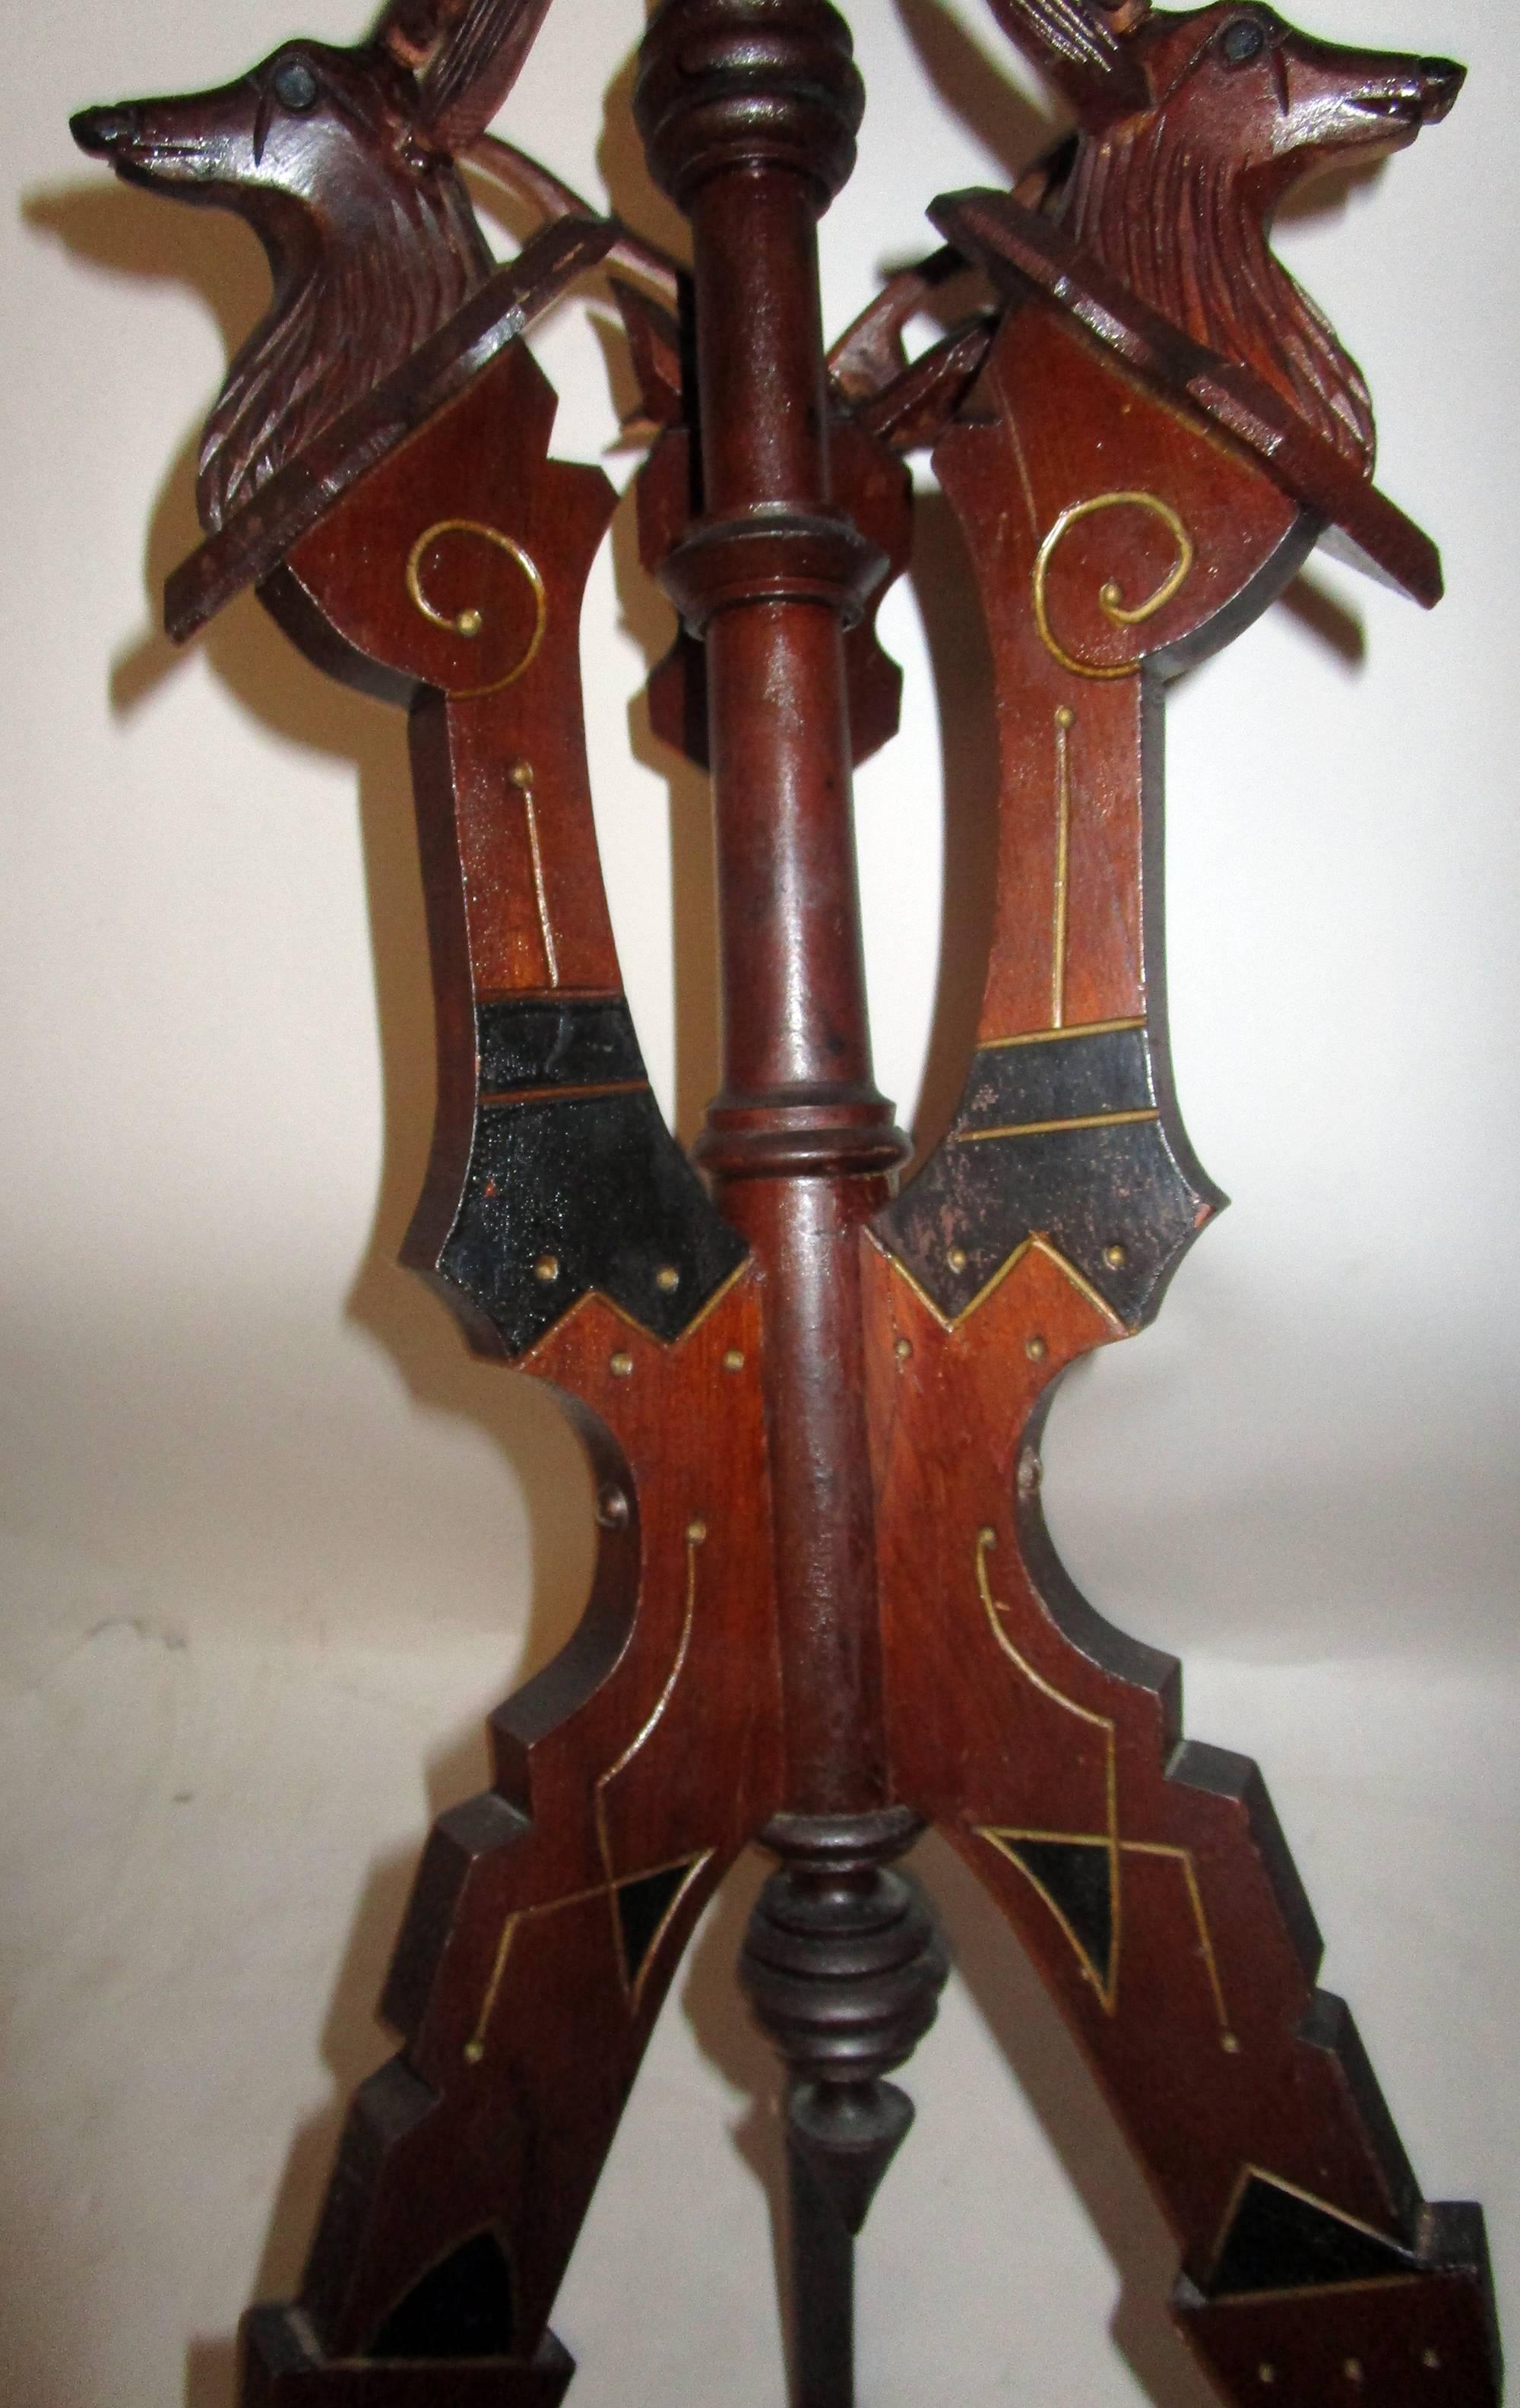 Carved 19th century Eastlake Mahogany Stand with Adirondack Style Stag Heads